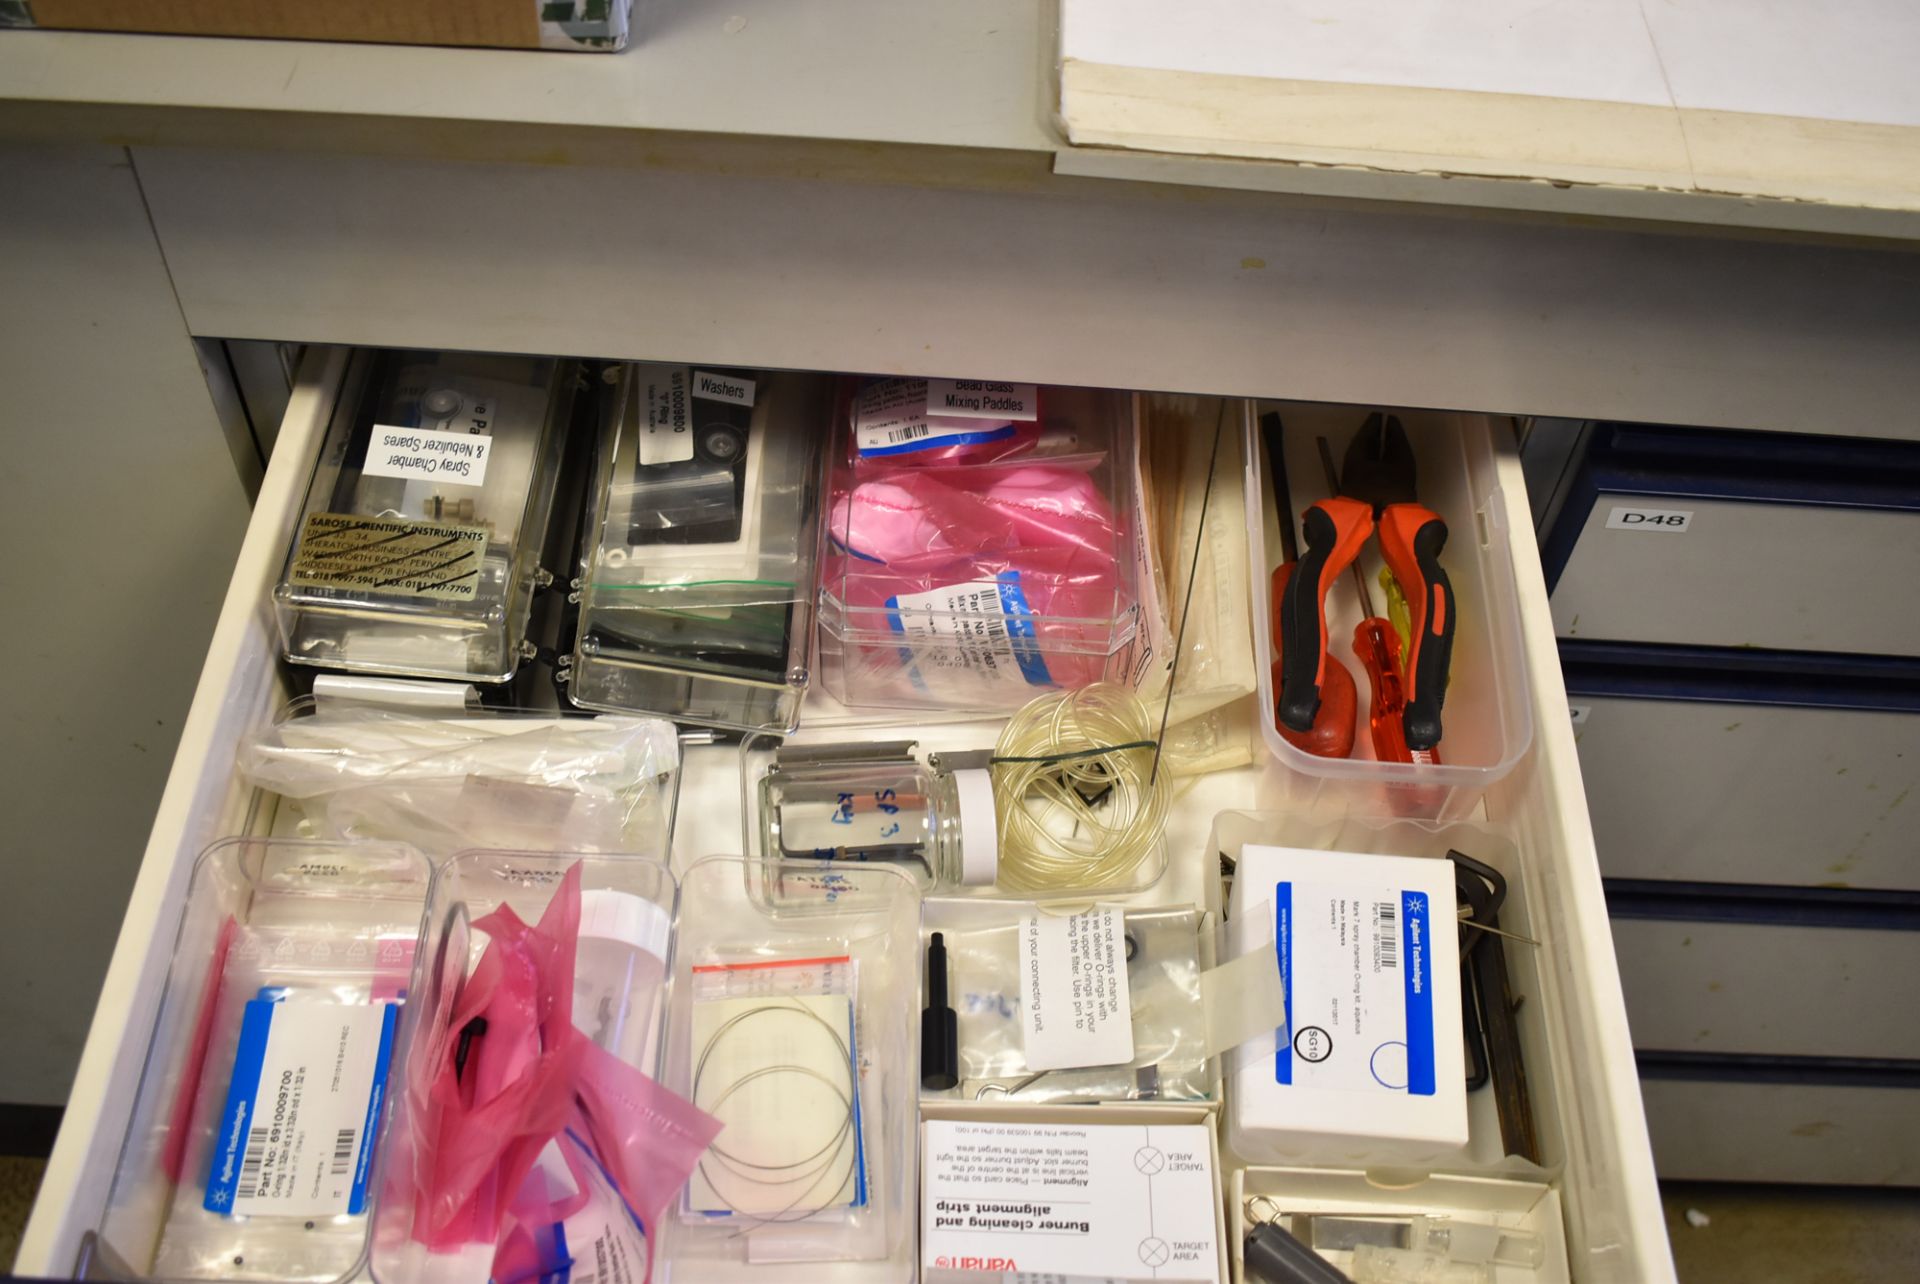 LOT/ 2 SECTION LAB STORAGE CABINET WITH CONTENTS - AA ACCESSORIES & SUPPLIES (ROOM 264) [RIGGING - Image 2 of 5